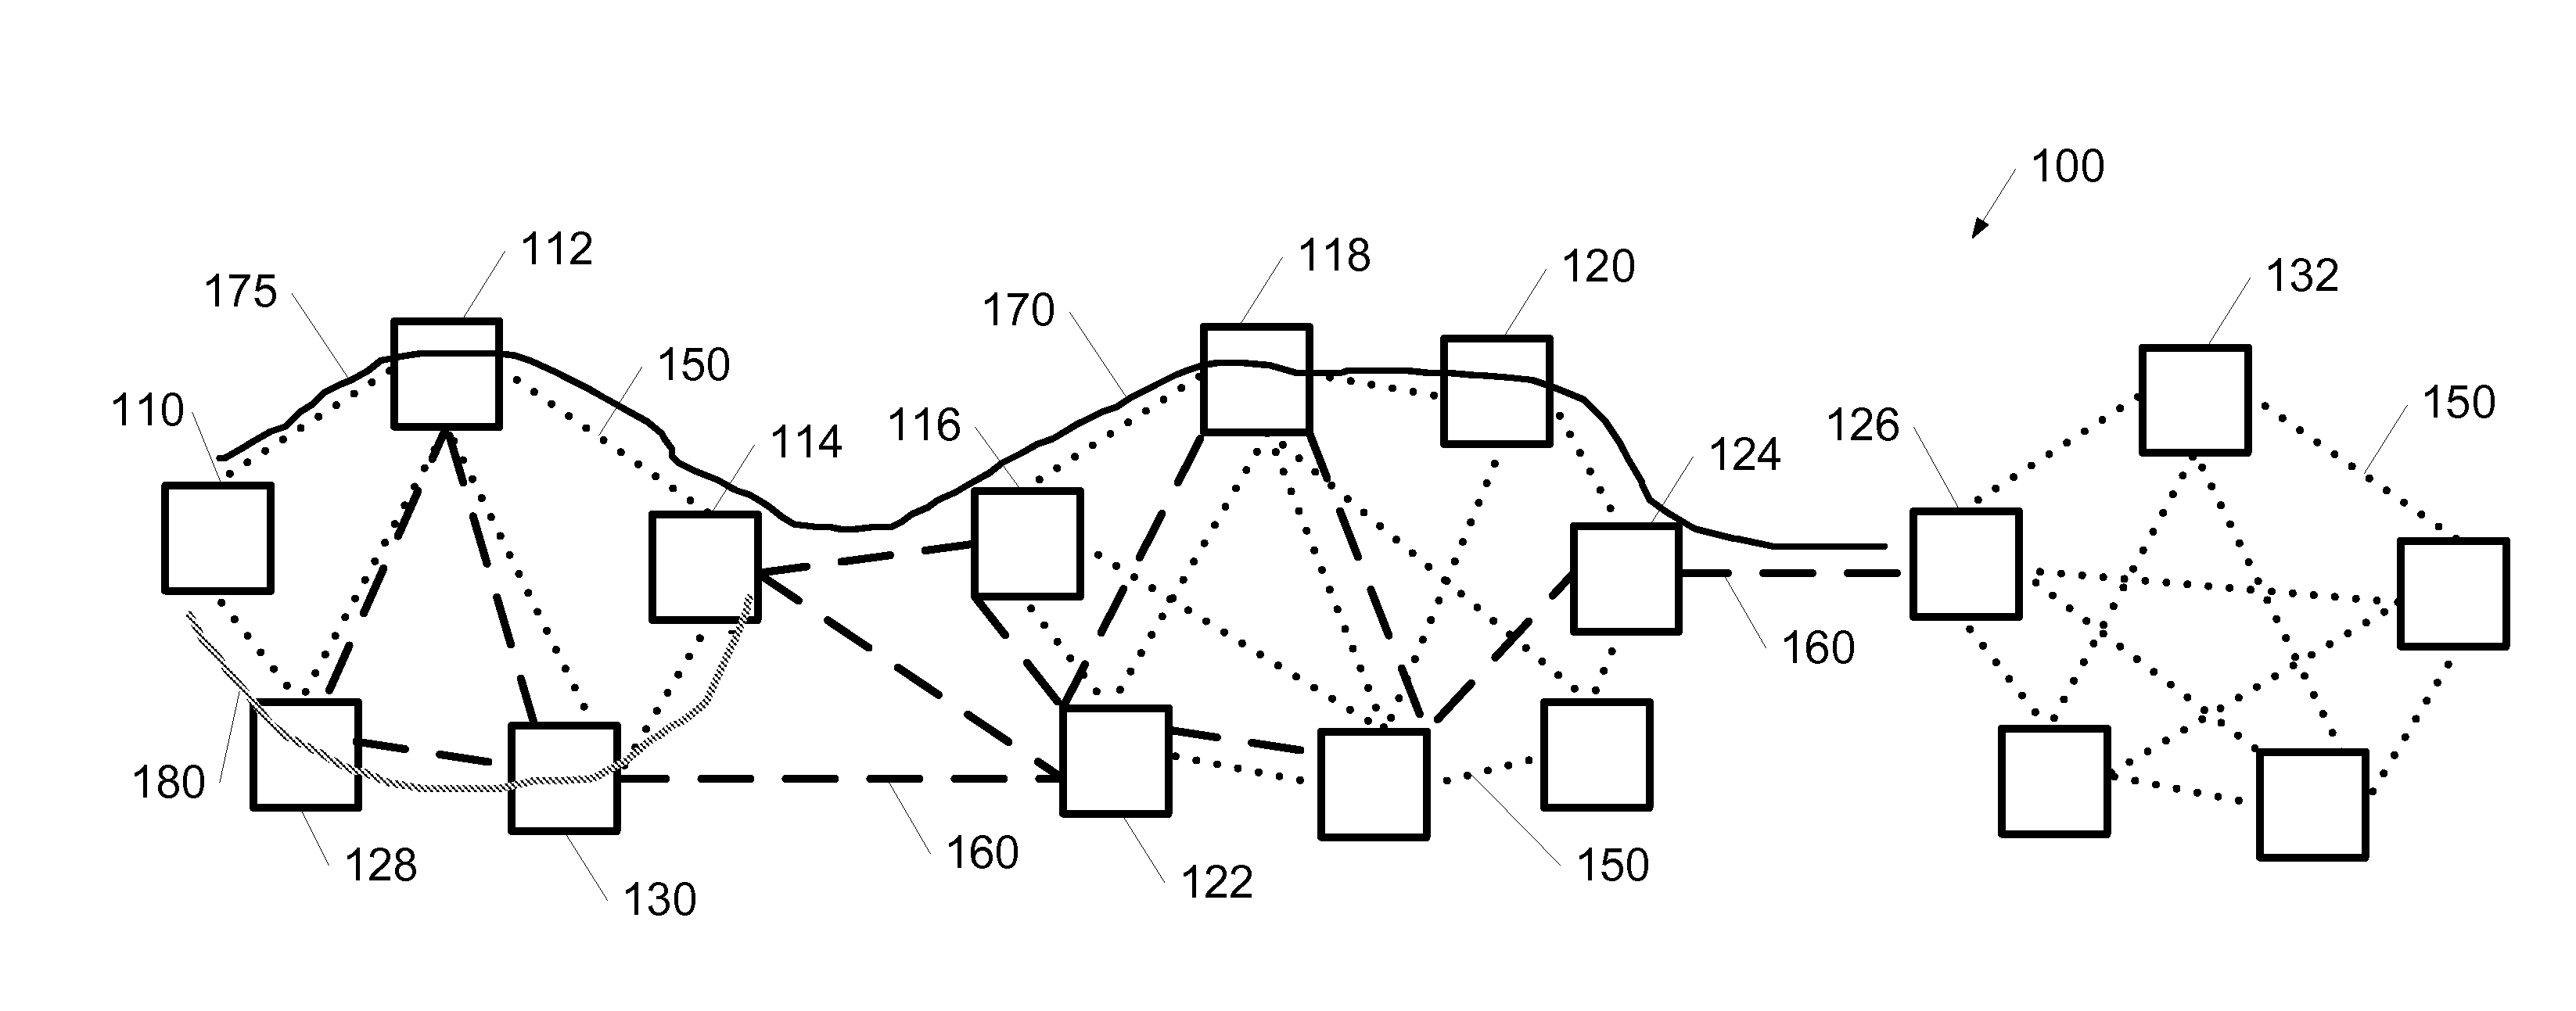 System and method for high throughput communication in a mesh hybrid network